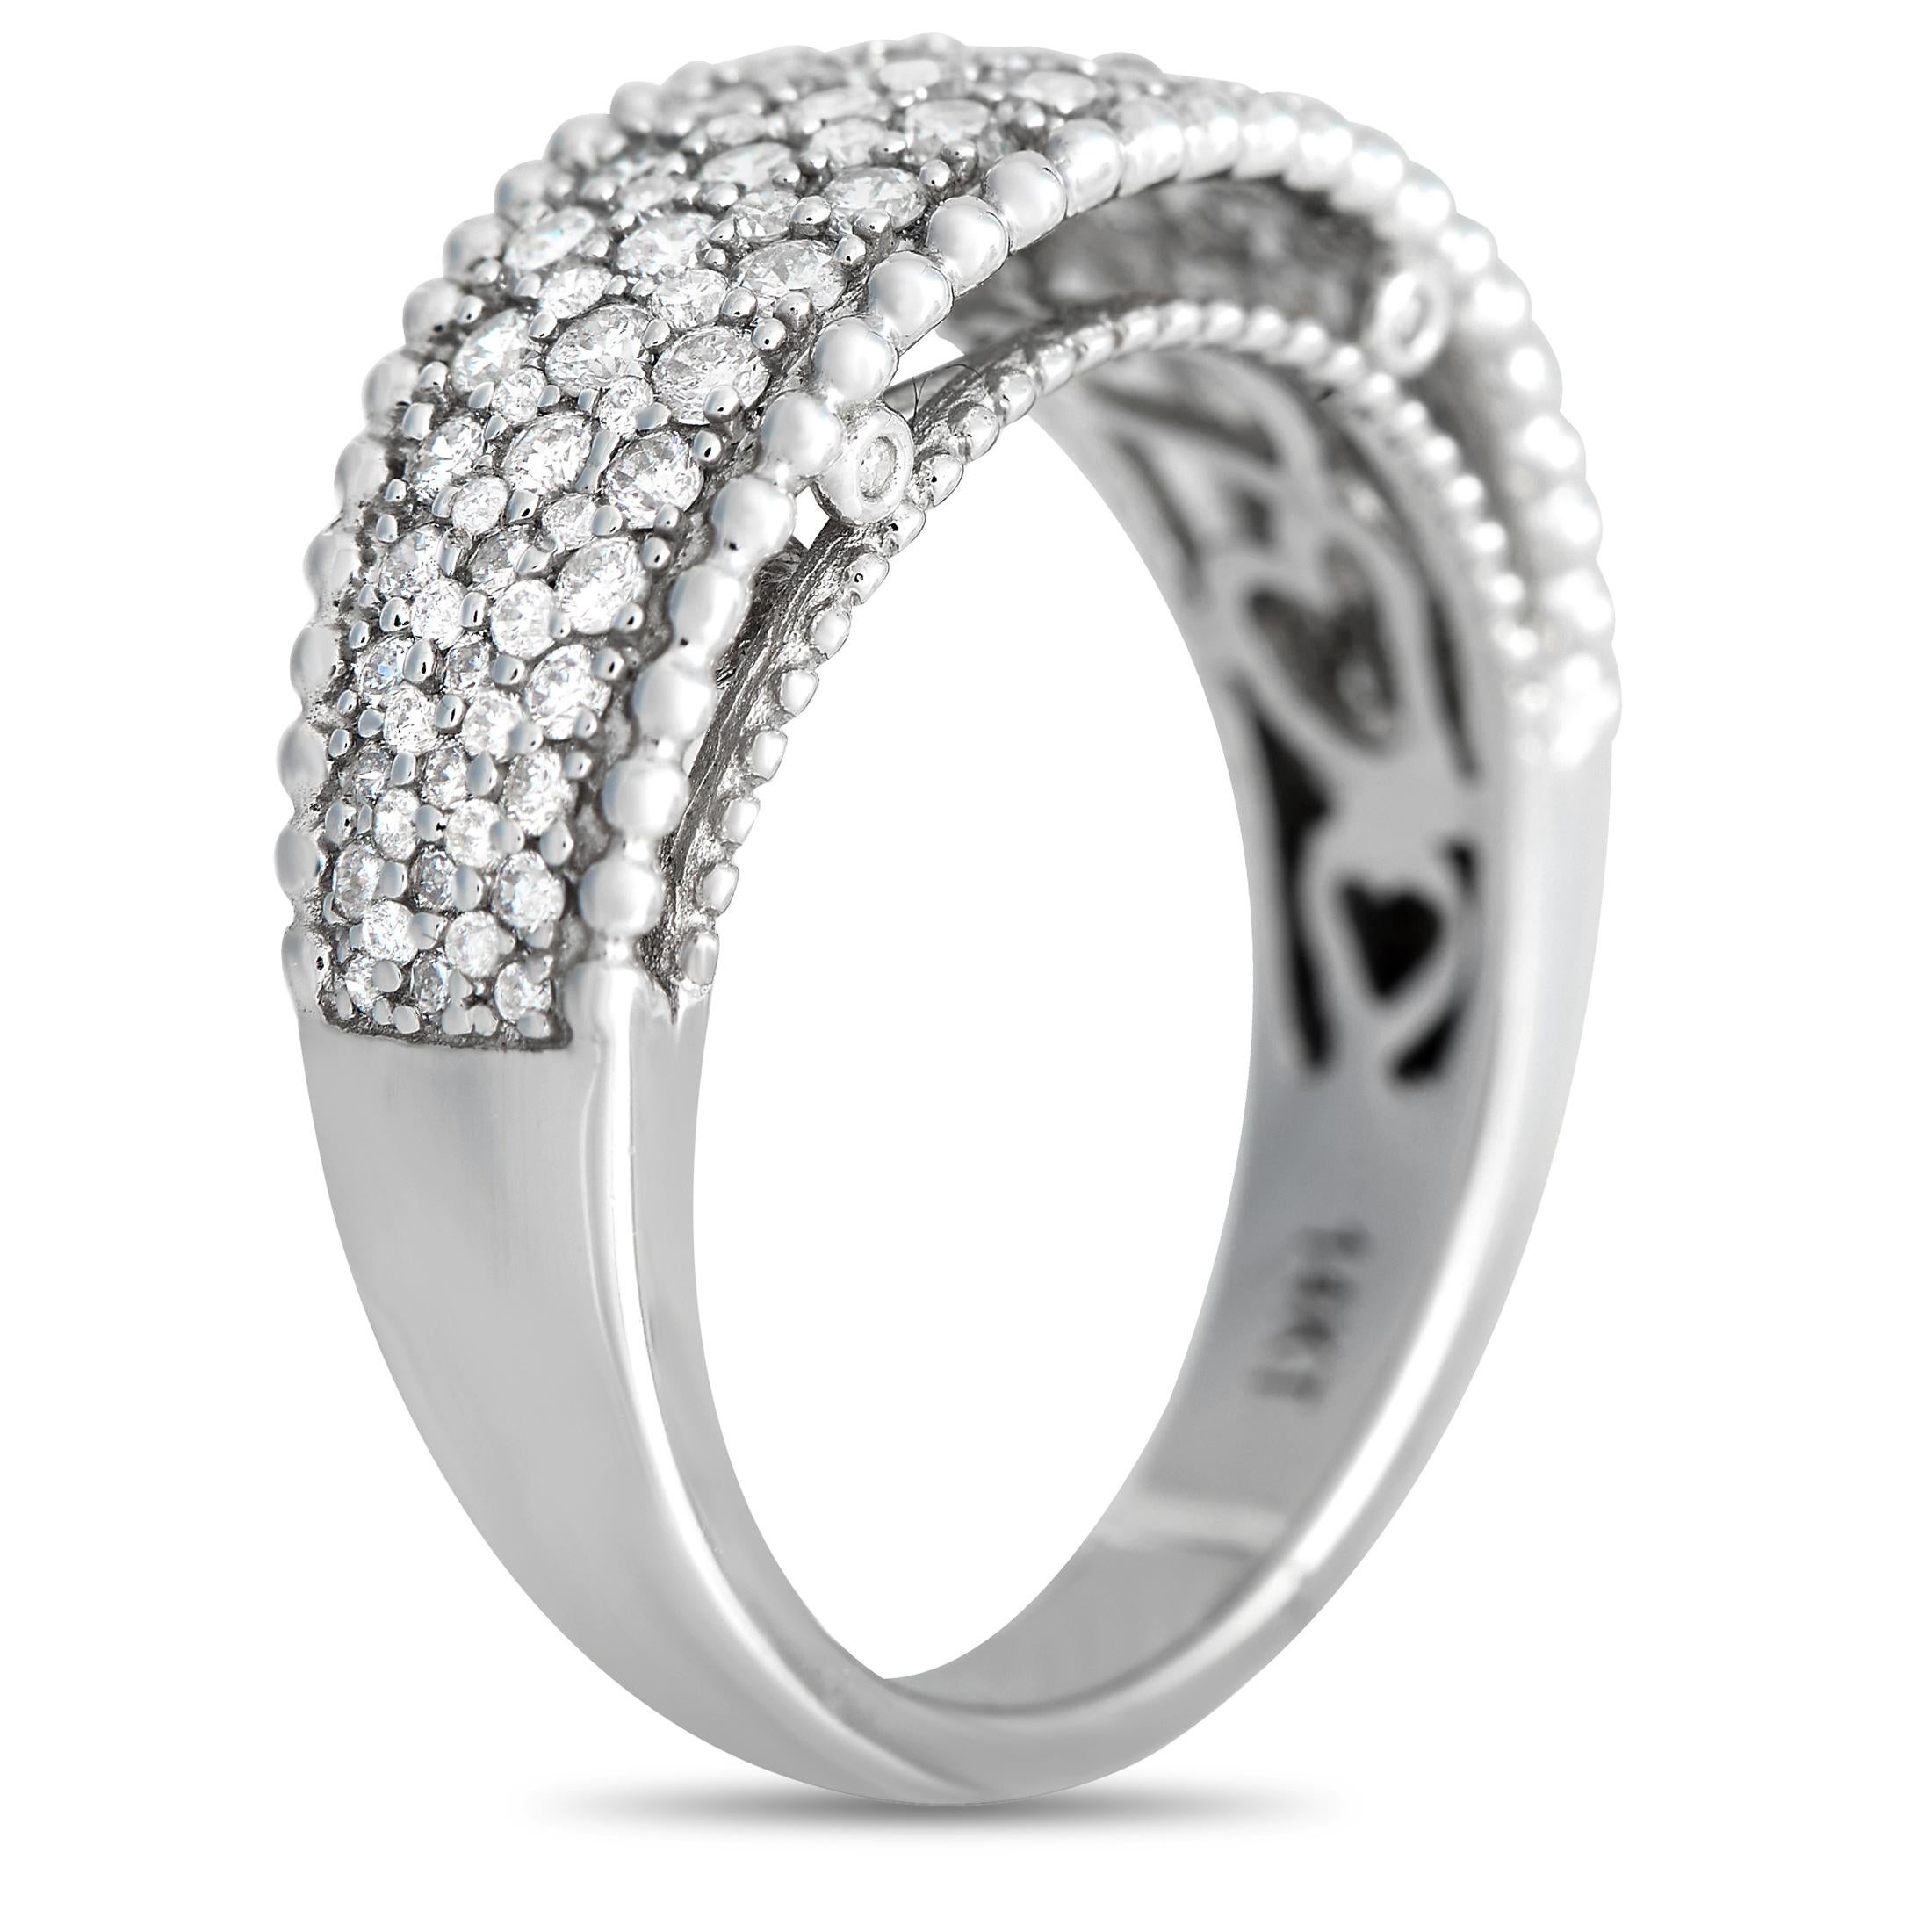 A 14K white gold setting with delicate millegrain accents at the edges provides the perfect foundation for this ring’s sparkling inset diamonds, which together total 1.0 carats. Elegant and ideal for everyday wear, this piece features a 4mm wide